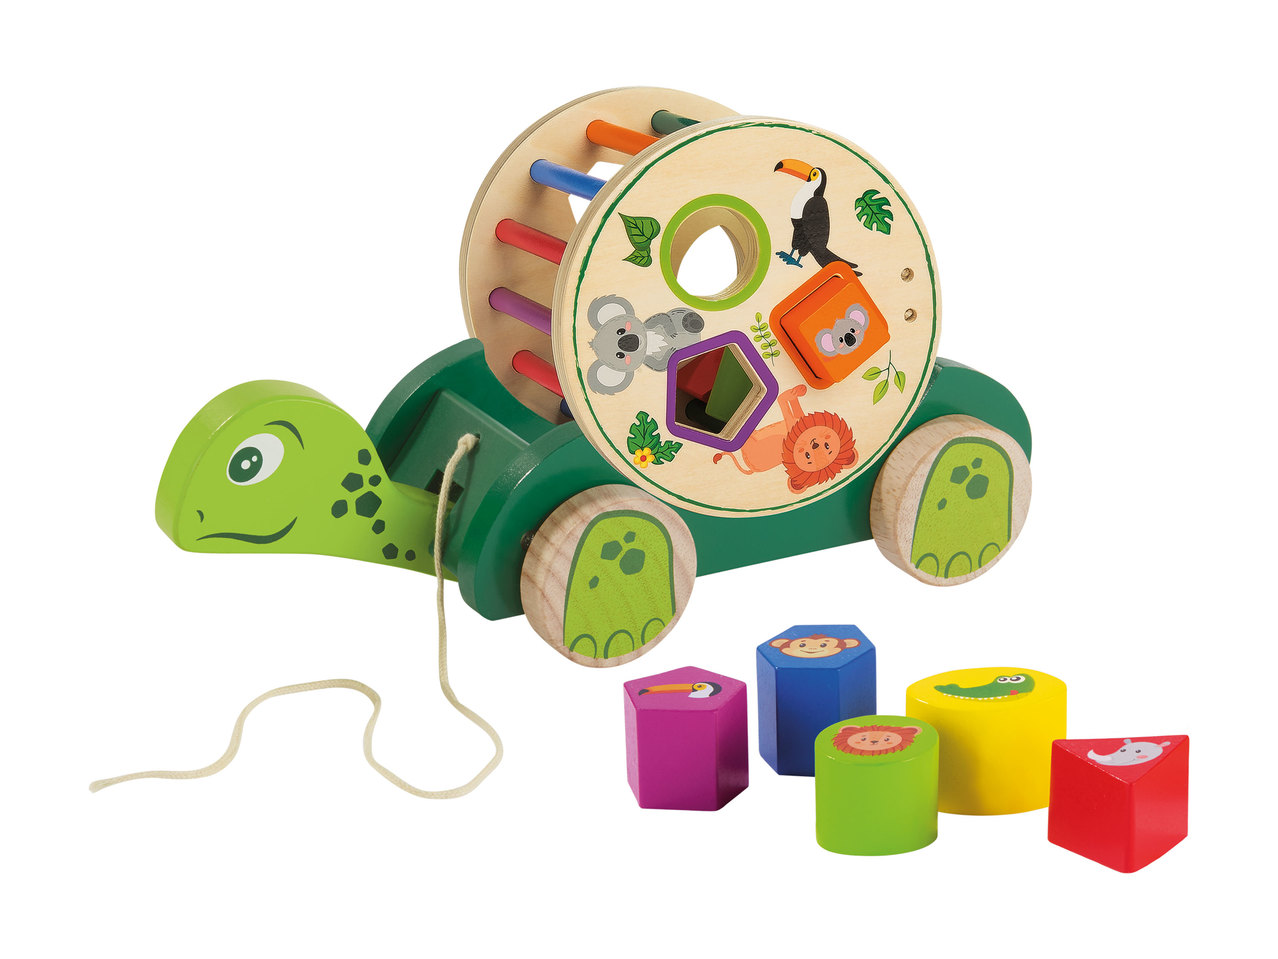 Playtive Junior 3D Wooden Learning Toys1